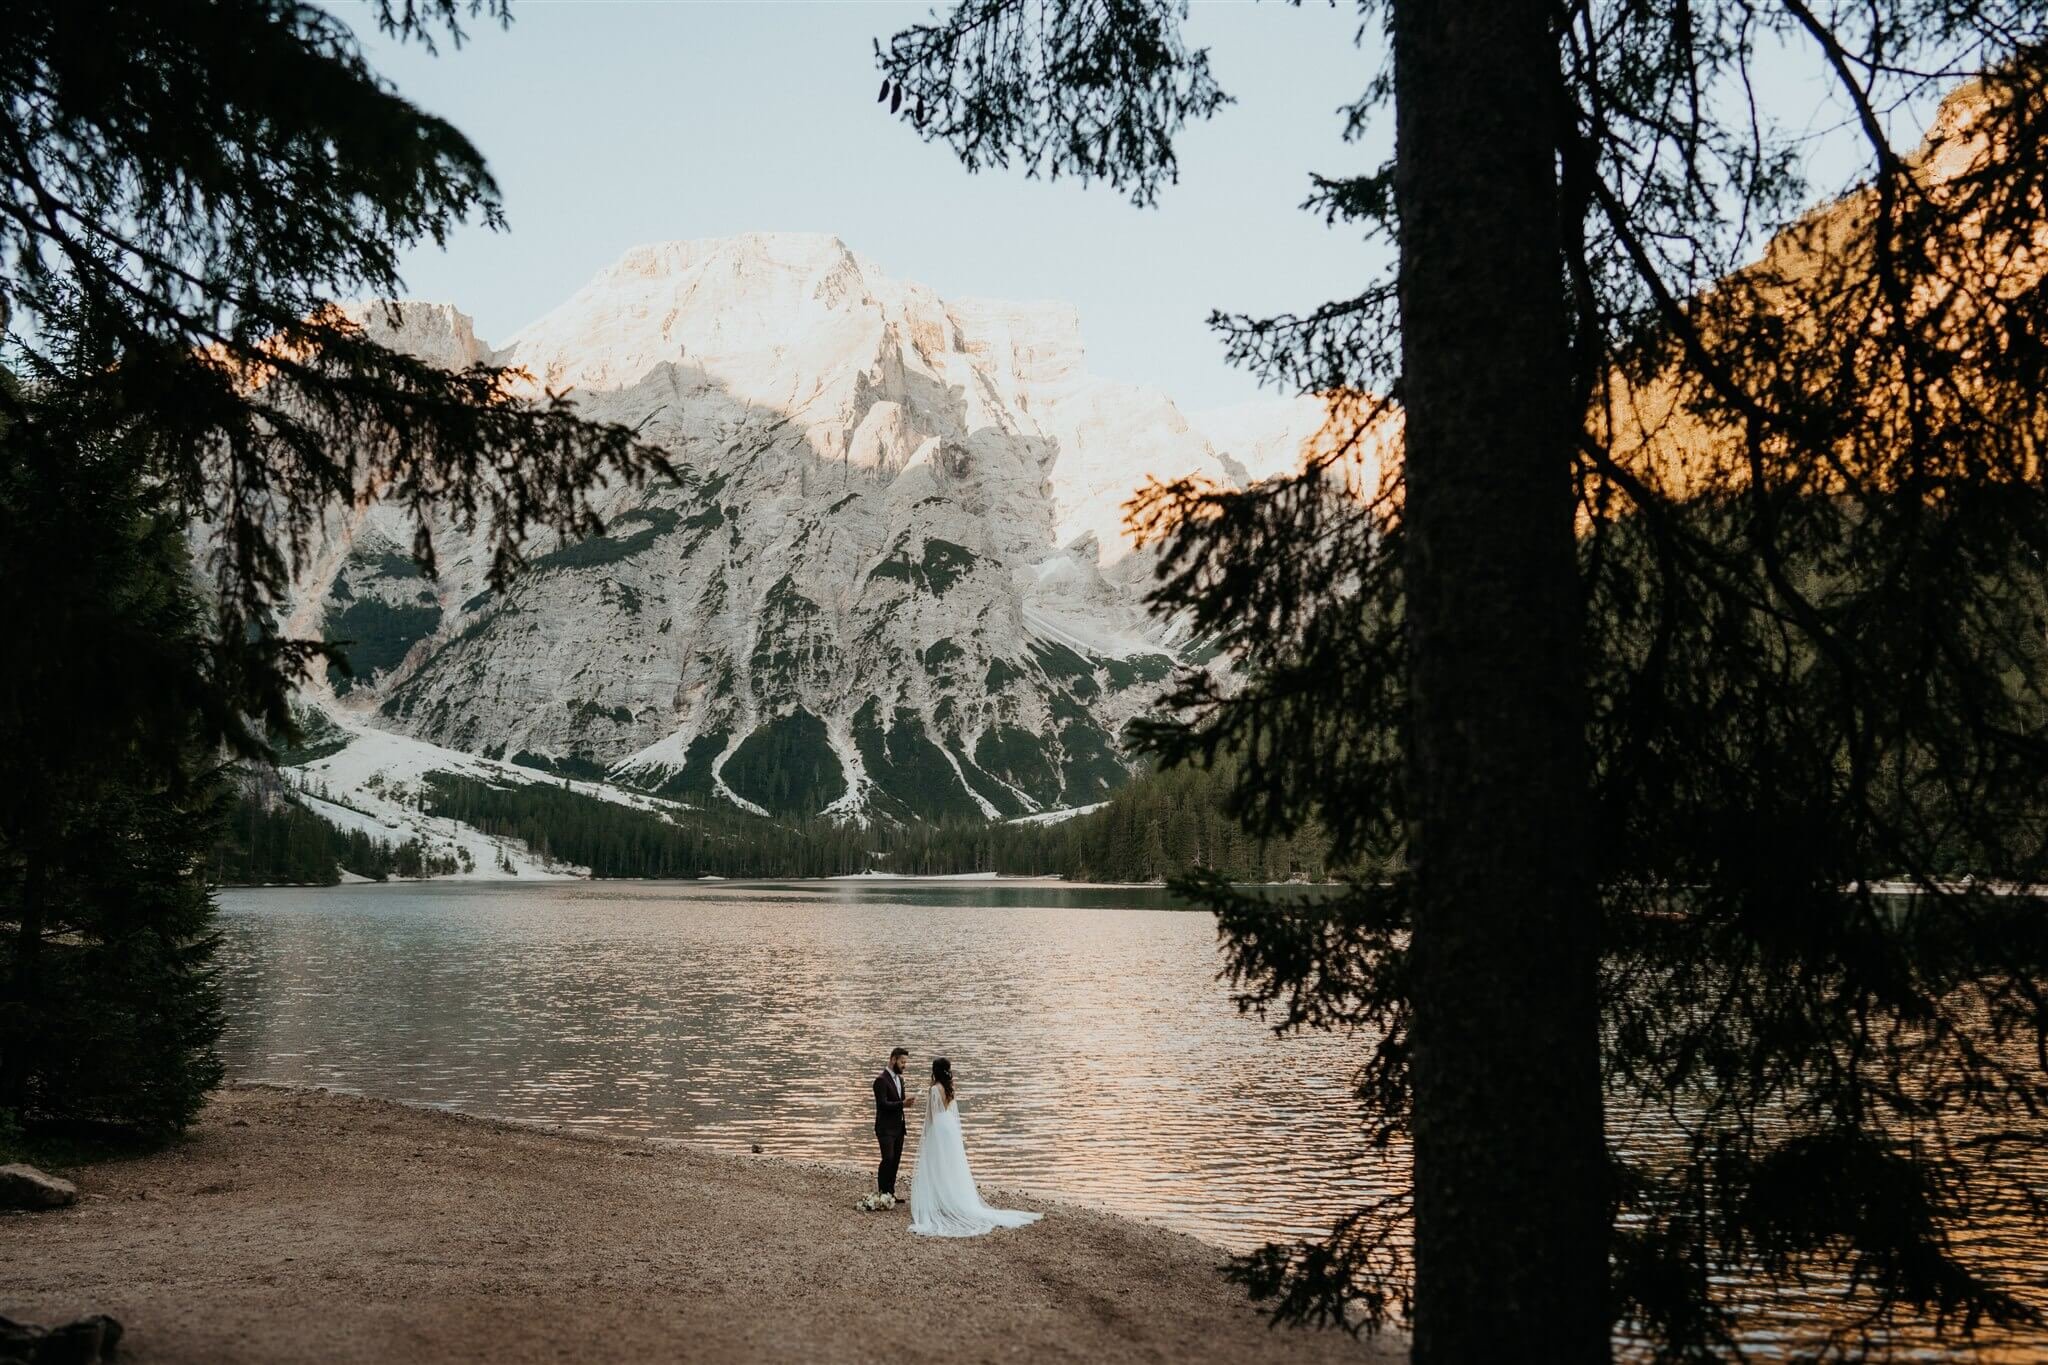 Bride and groom exchange vows by the lake at intimate vow renewal in Italy